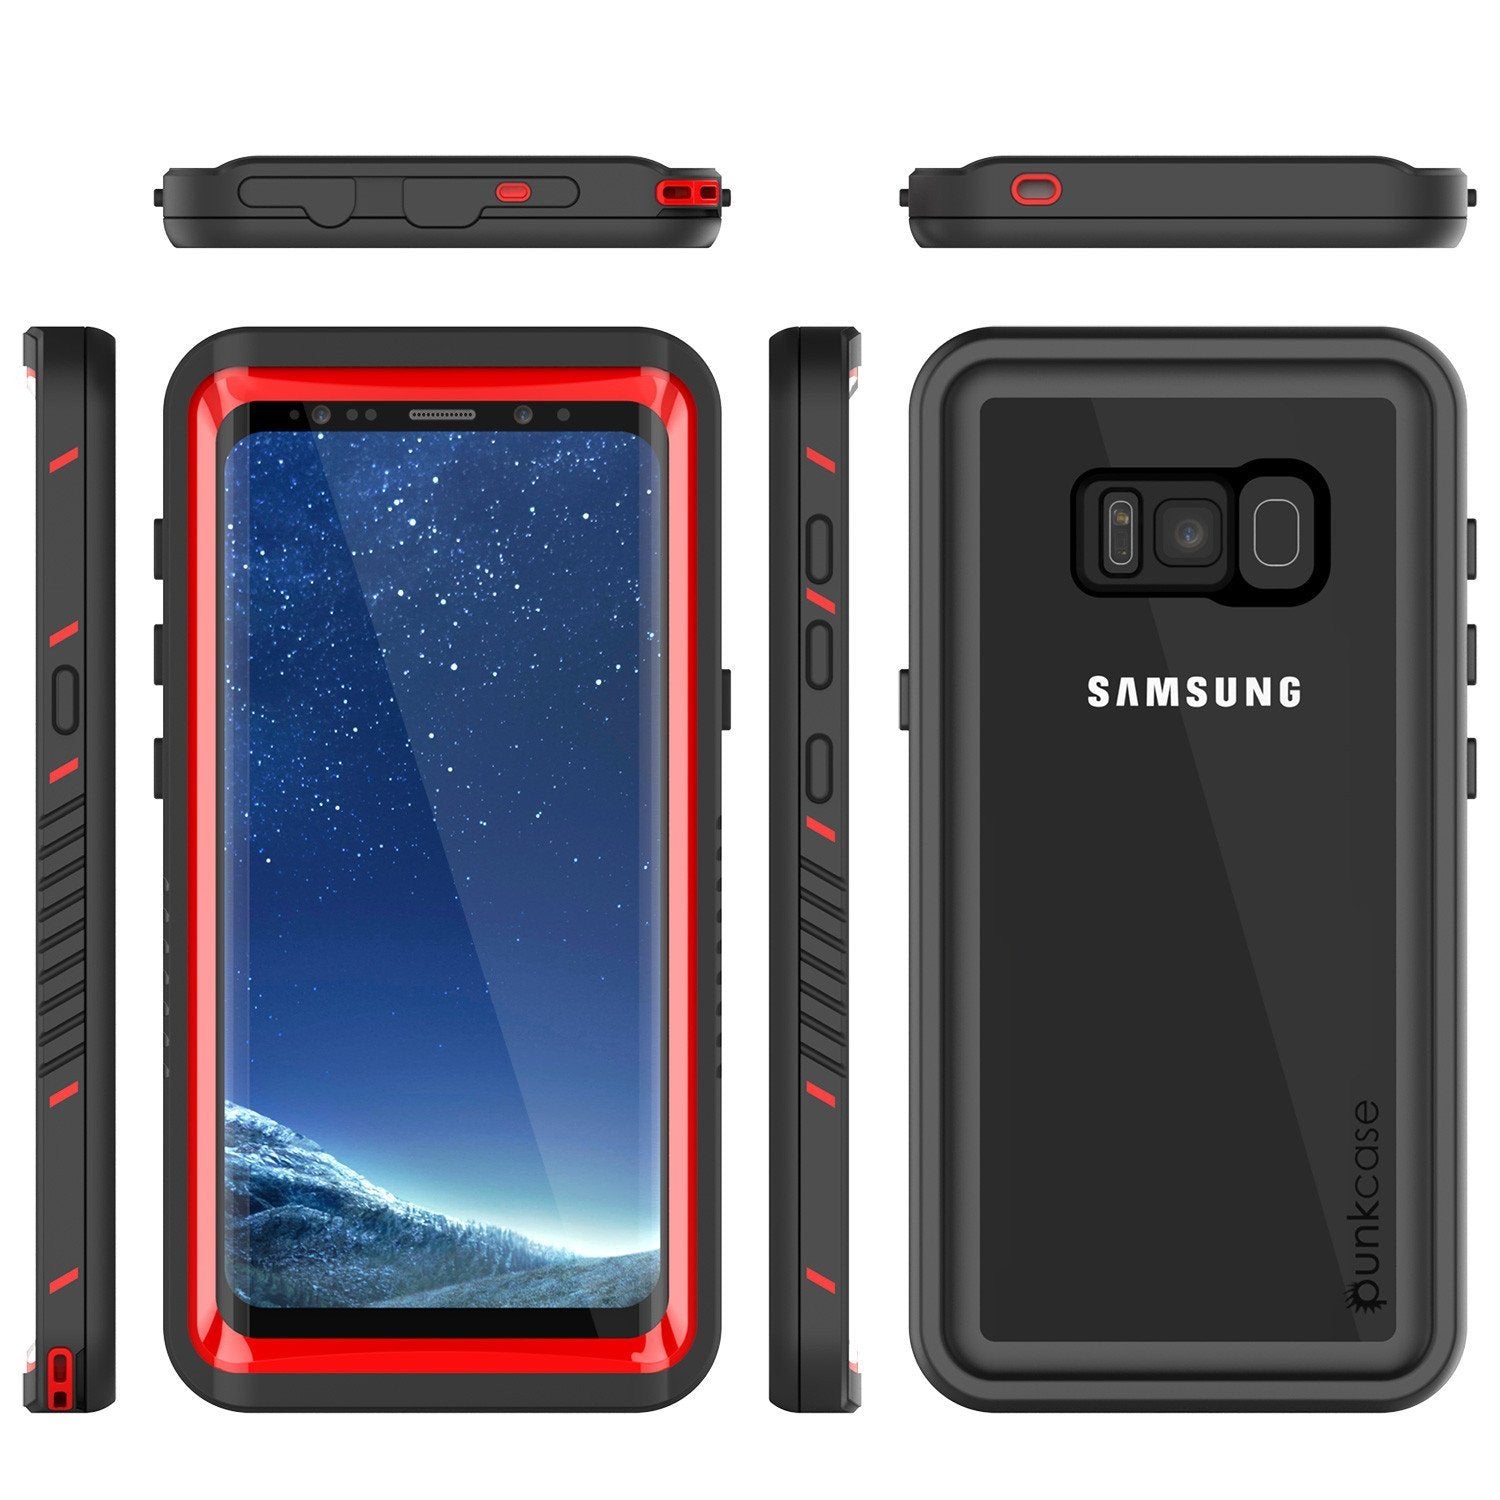 Galaxy S8 Case, Punkcase [Extreme Series] Armor Red Cover